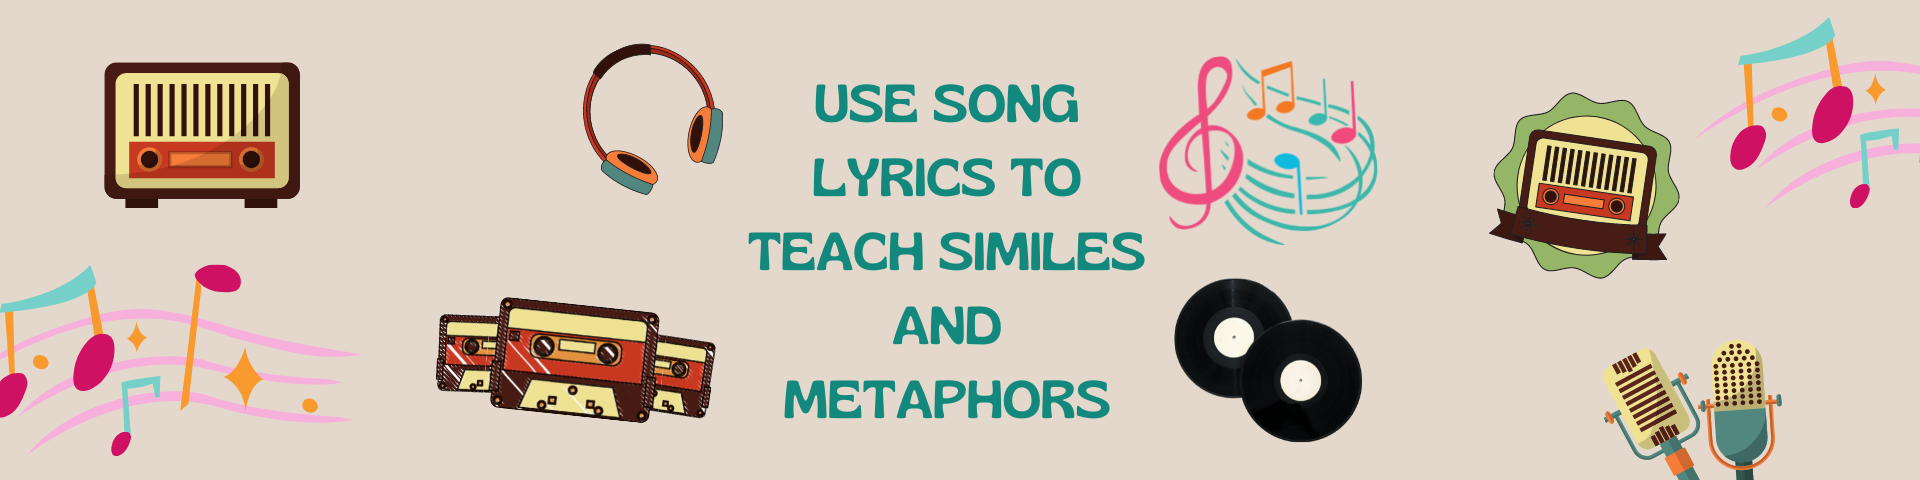 Use Song Lyrics (with care) to Teach Similes and Metaphors